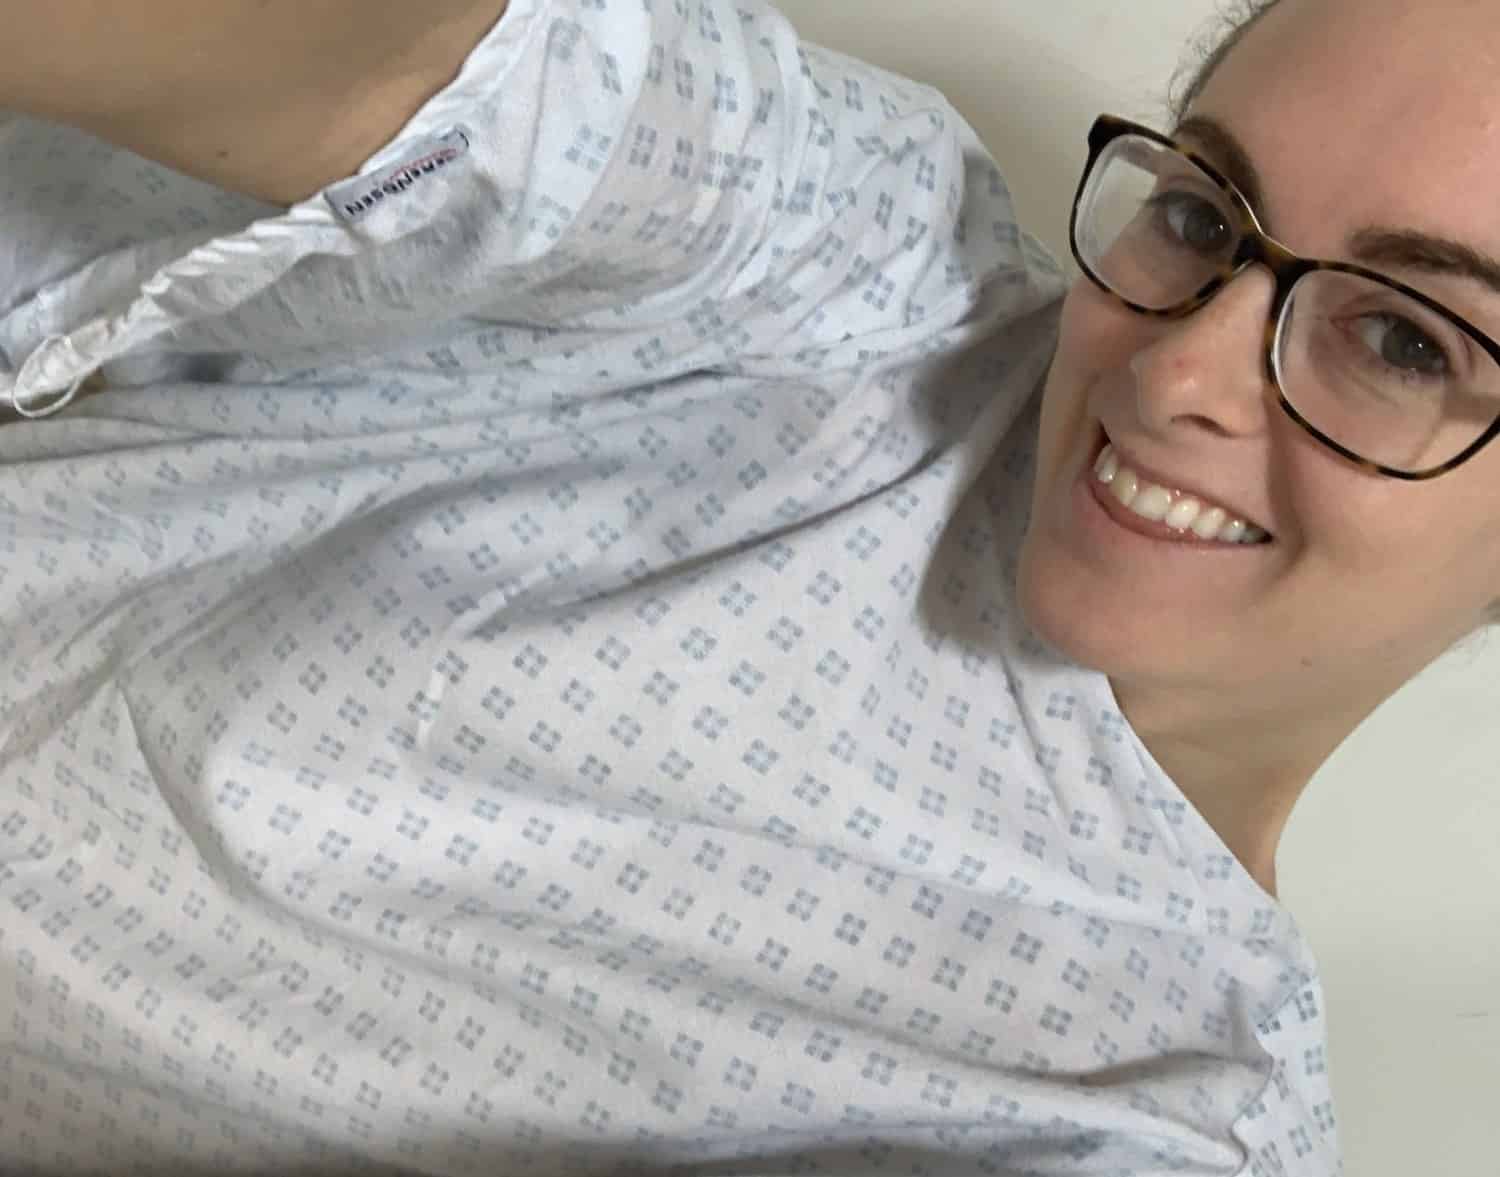 Girl in a hospital gown